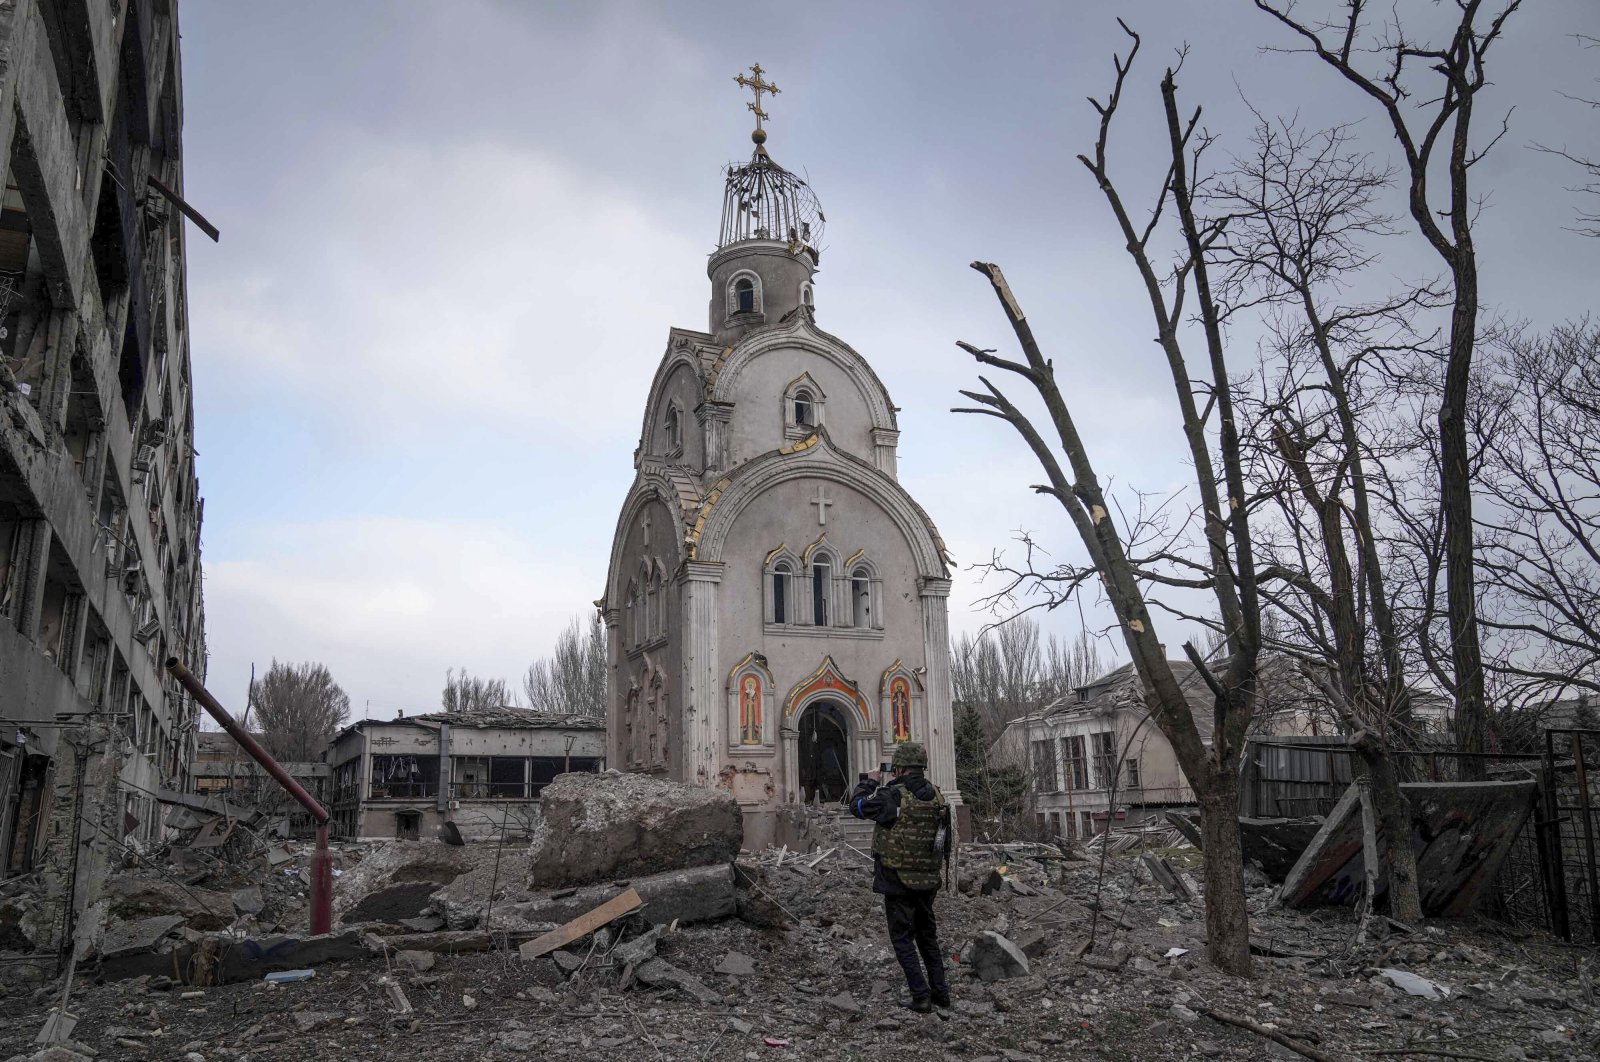 An Ukrainian soldier takes a photograph of a damaged church after shelling in a residential district in Mariupol, Ukraine, March 10, 2022. (AP Photo)